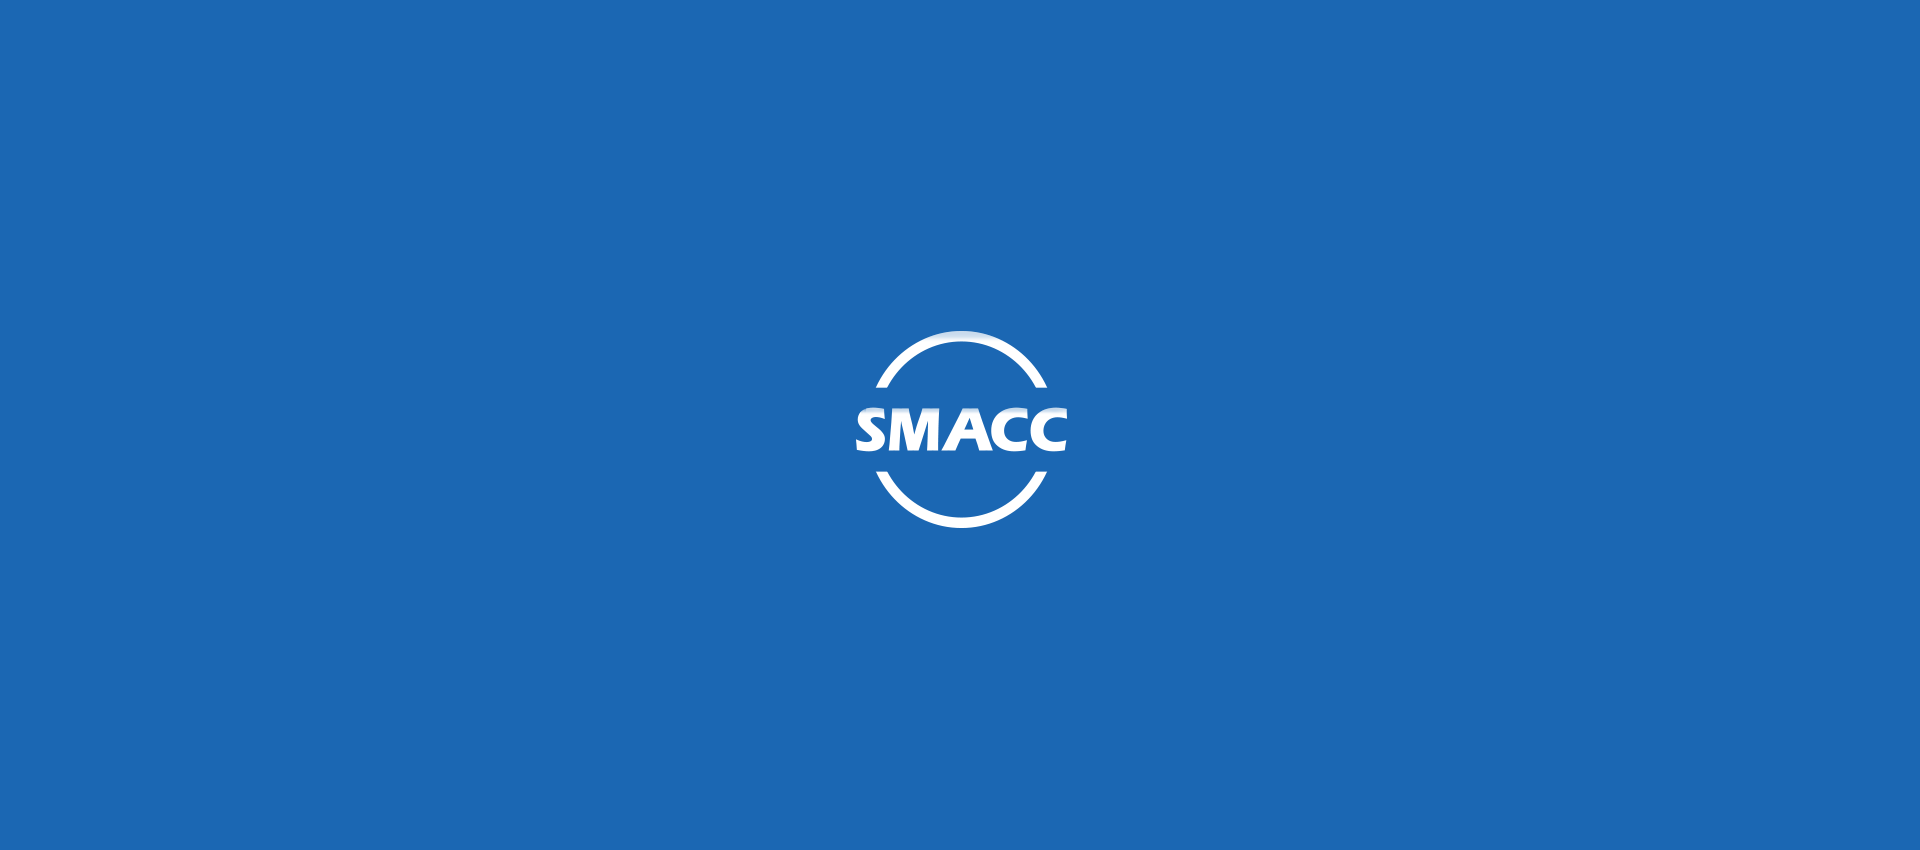 Arab Sea Information Systems Spurs Market Change by Migrating SMACC to Microsoft Azure